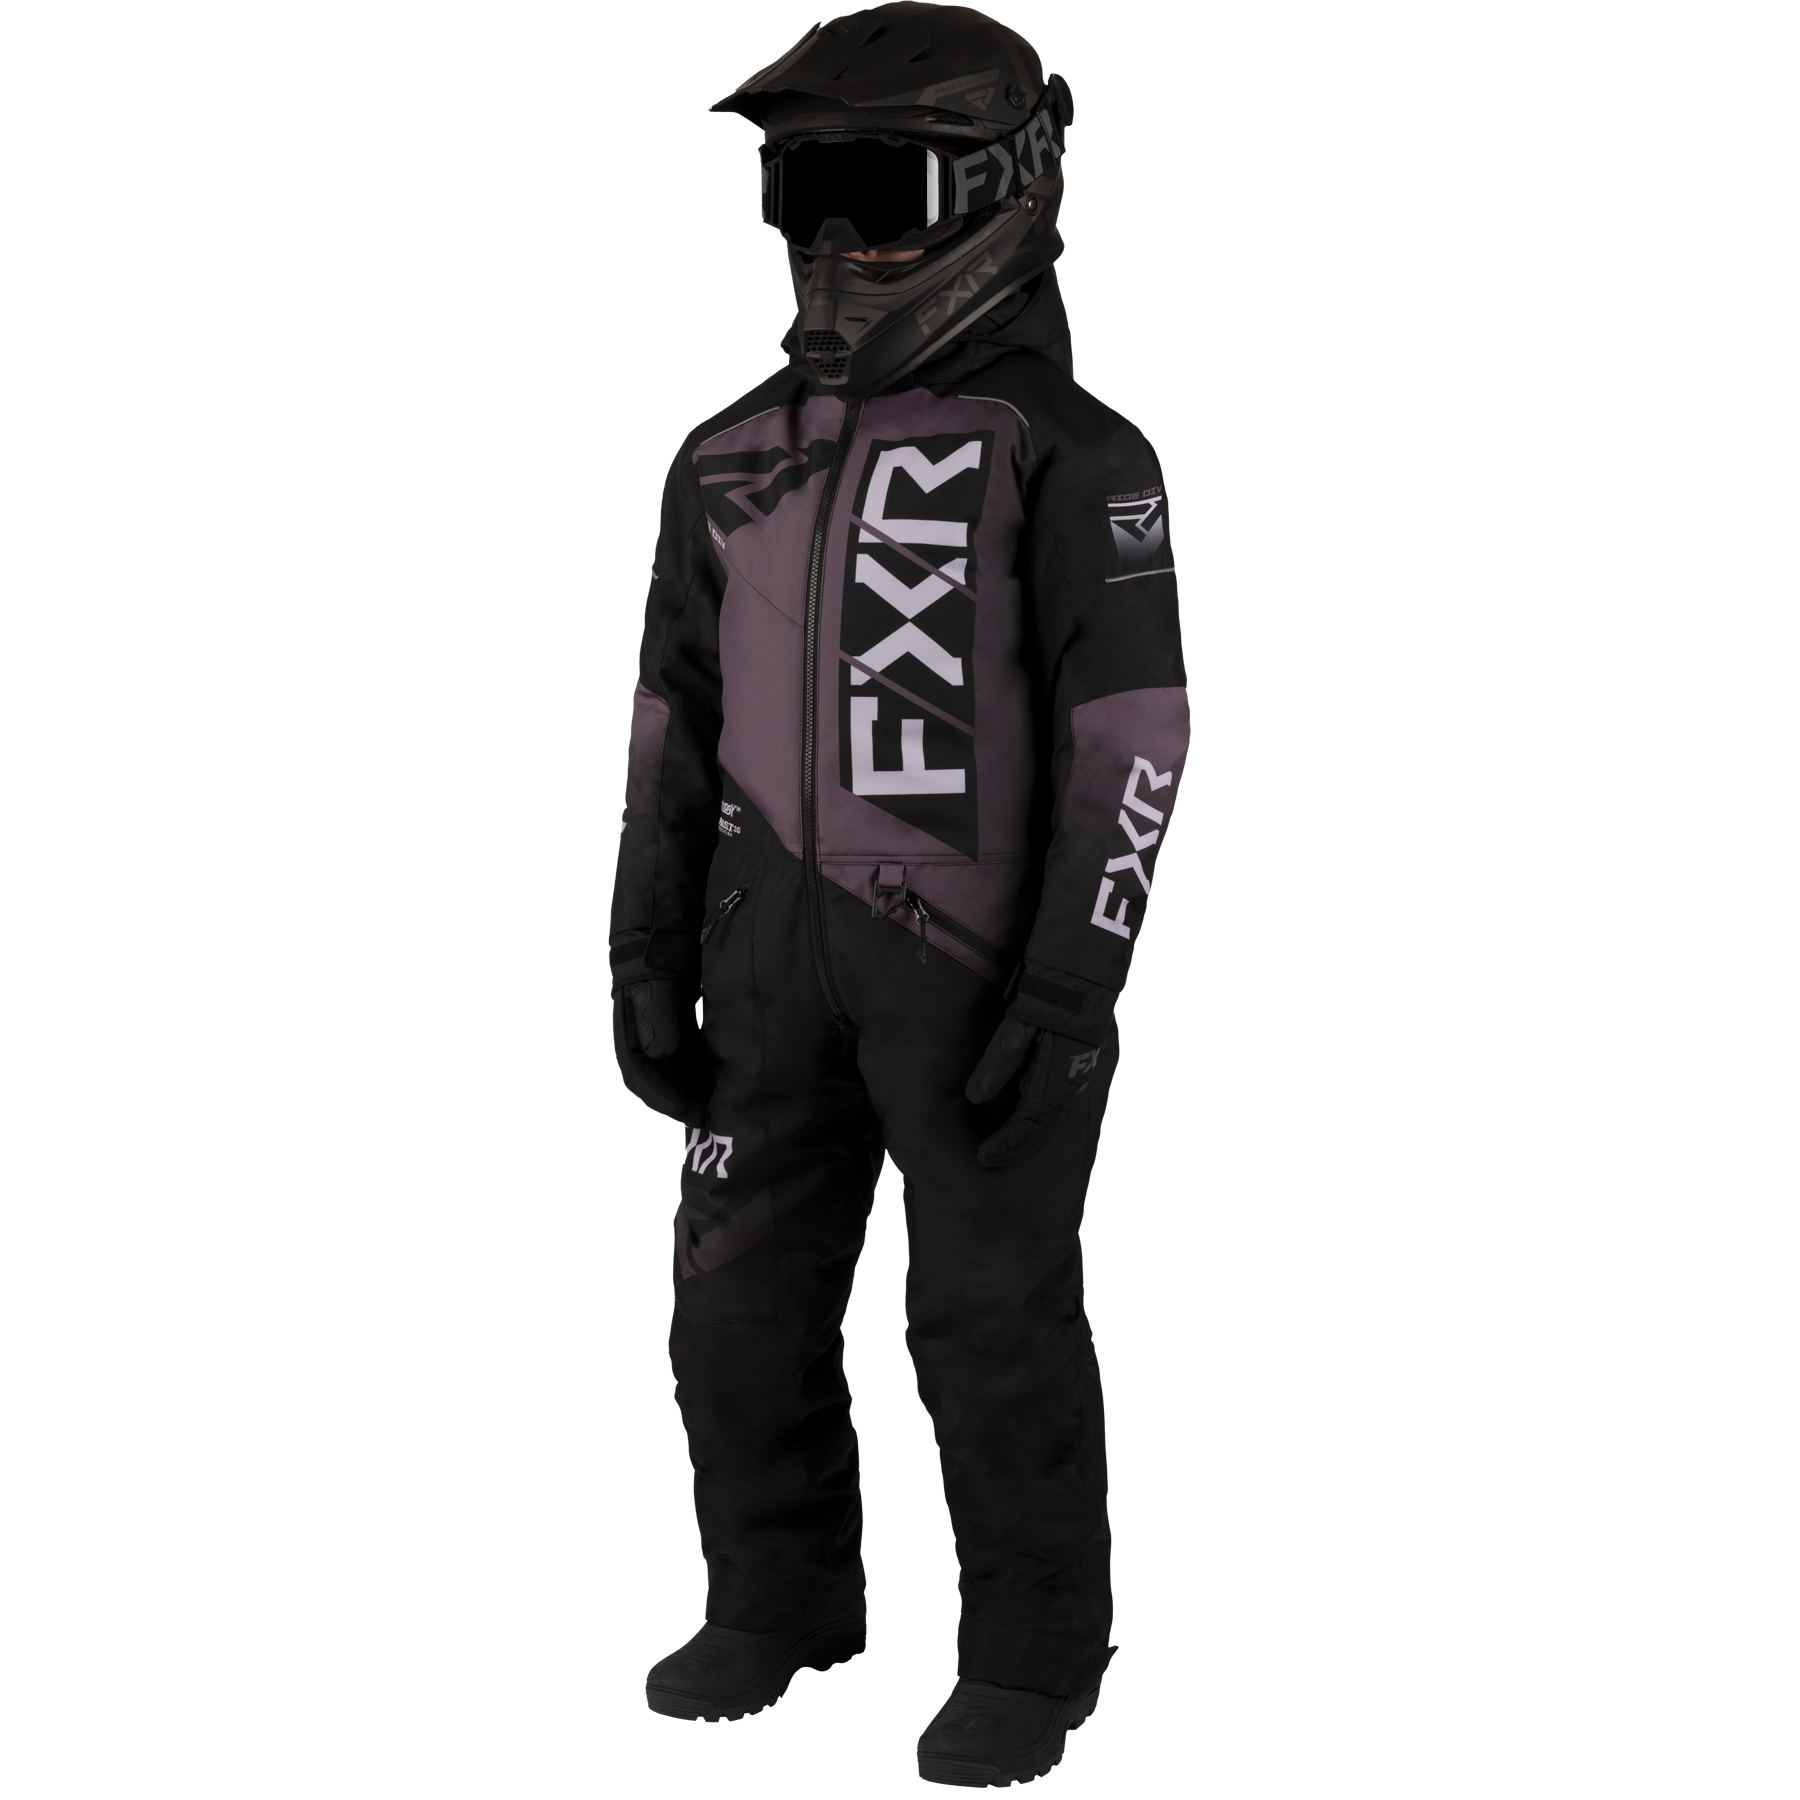 Onepiece FXR Child/Youth Helium, Black/Muted Grape/Dusty Lilac